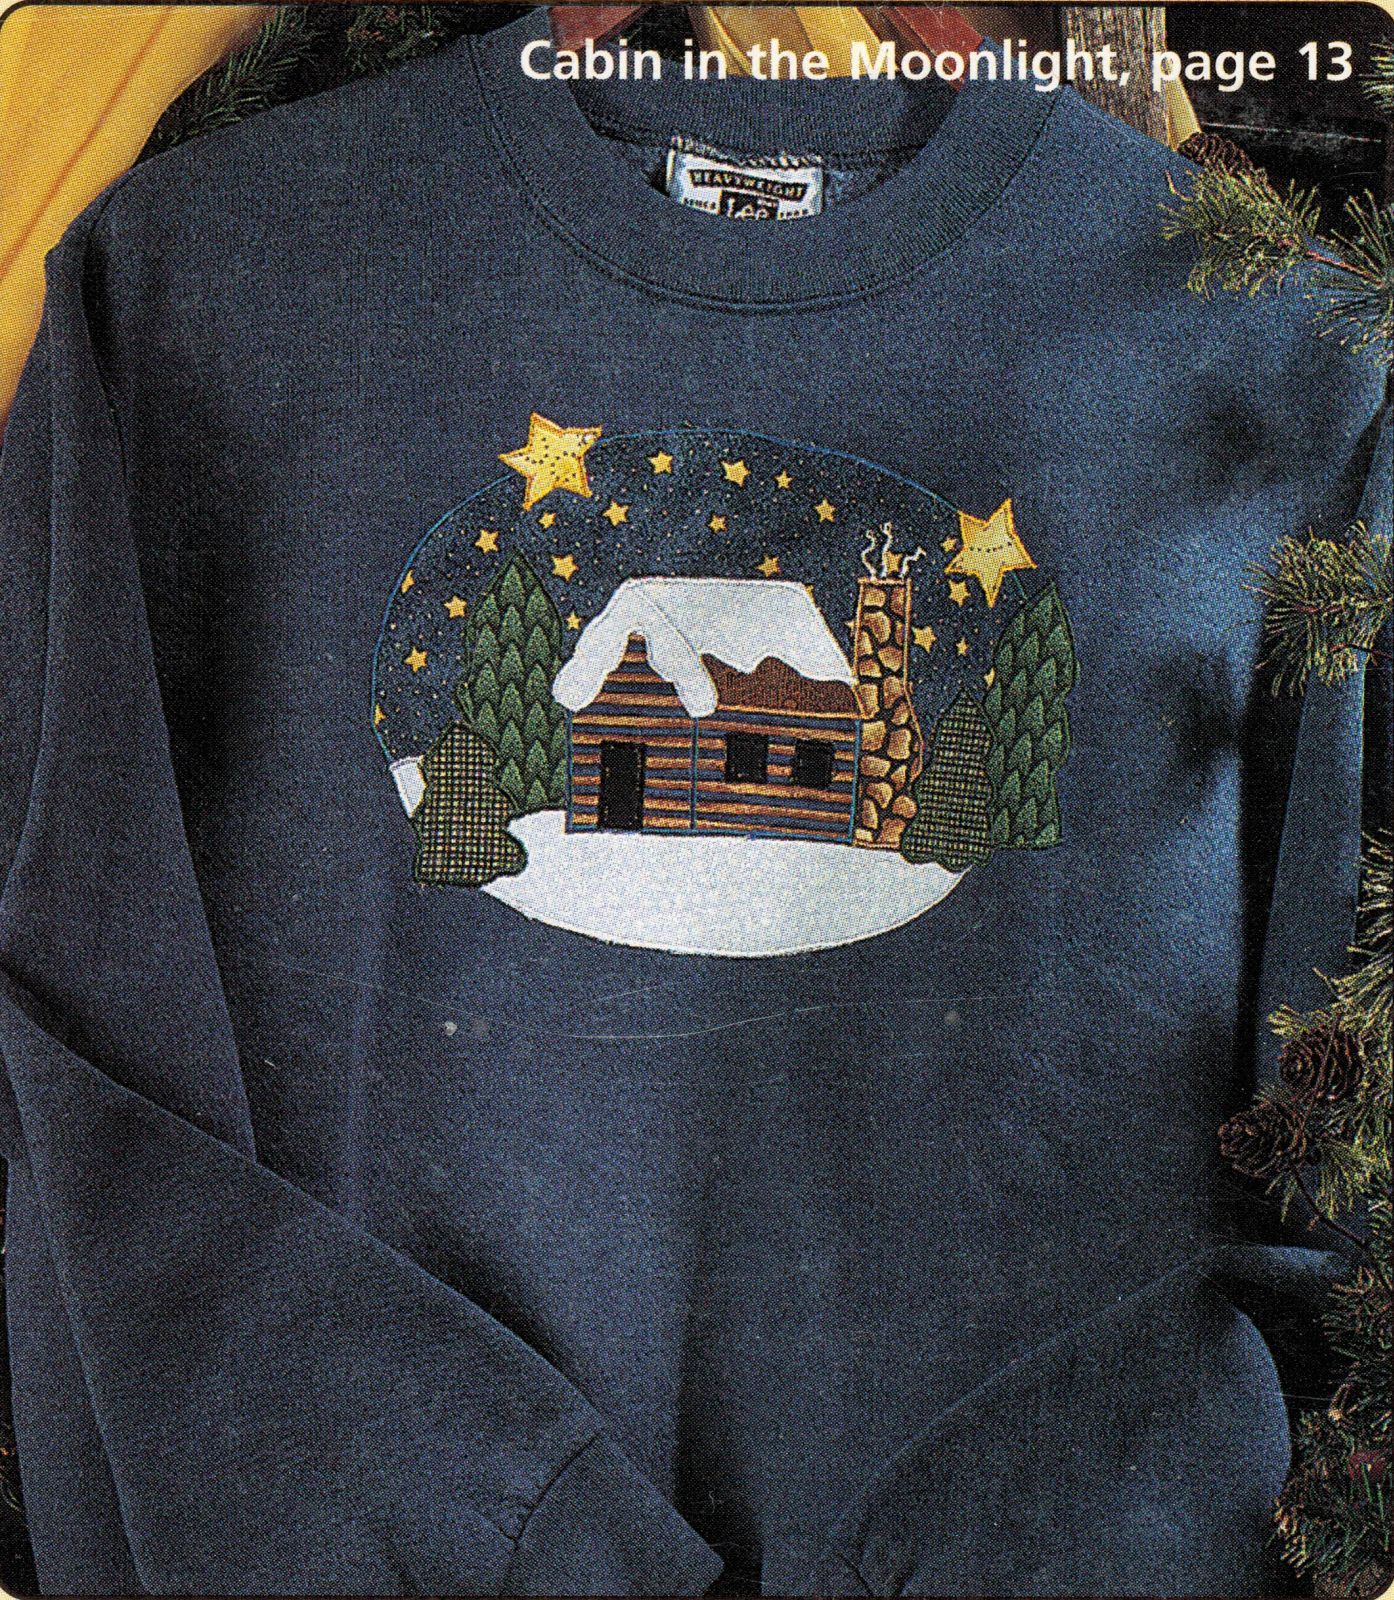 8 Holiday Christmas Quilted Sew Machine Applique Sweatshirt Snowman ...